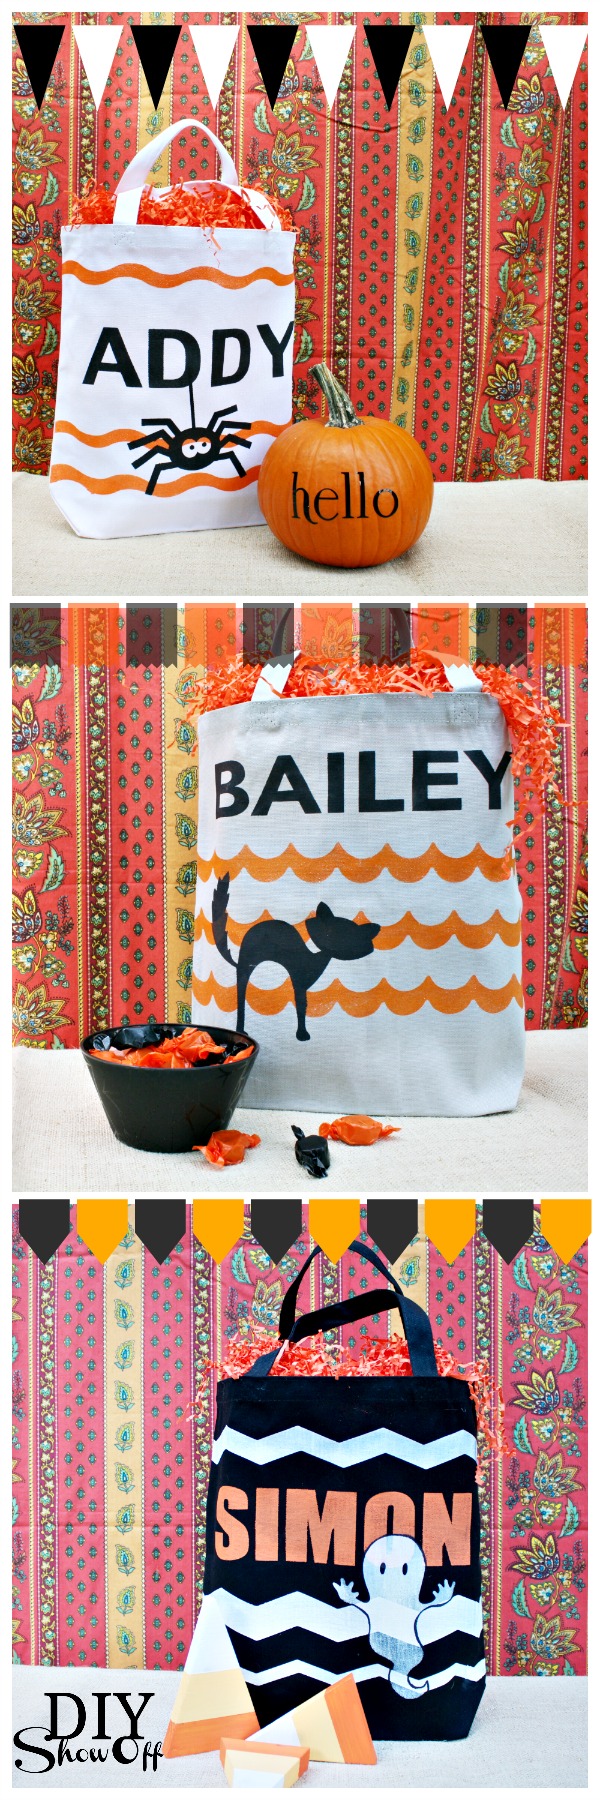 Personalized Trick or Treat Bags - DIY Show Off ™ - DIY Decorating